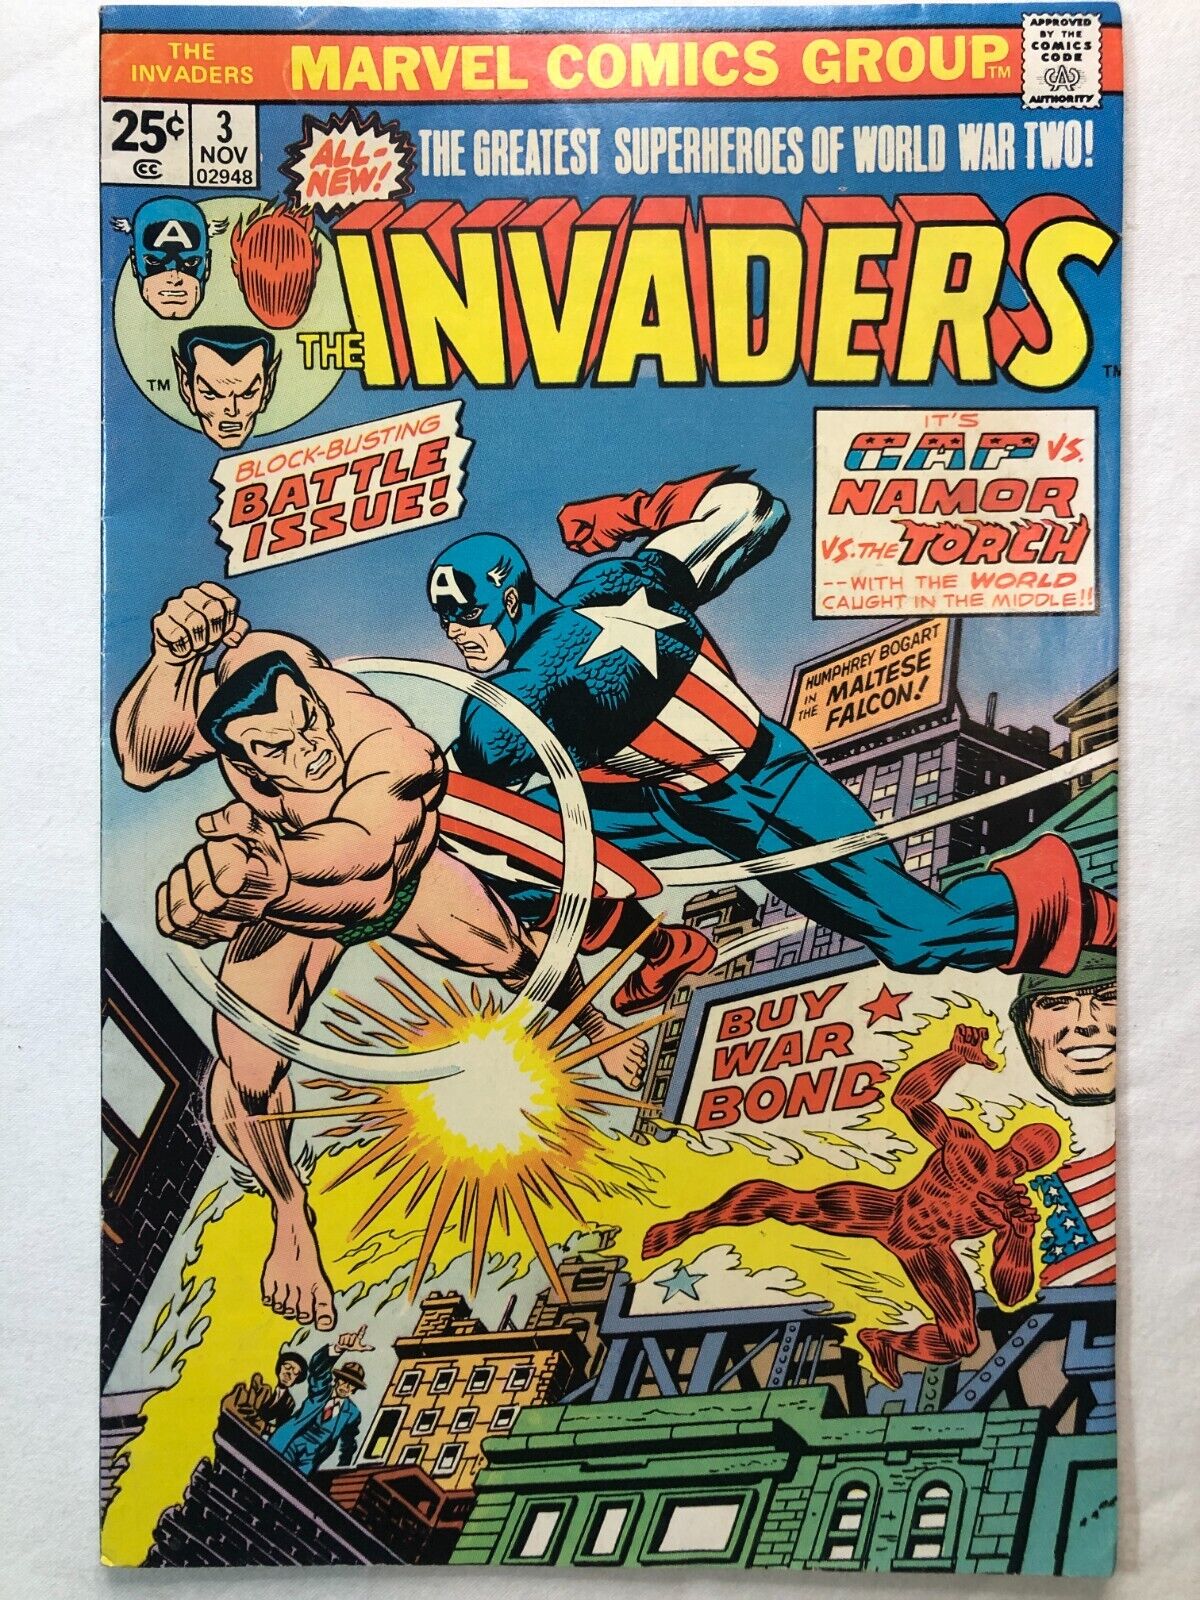 INVADERS #3 Marvel Comics 1975 Jack Kirby Cover Nice Condition